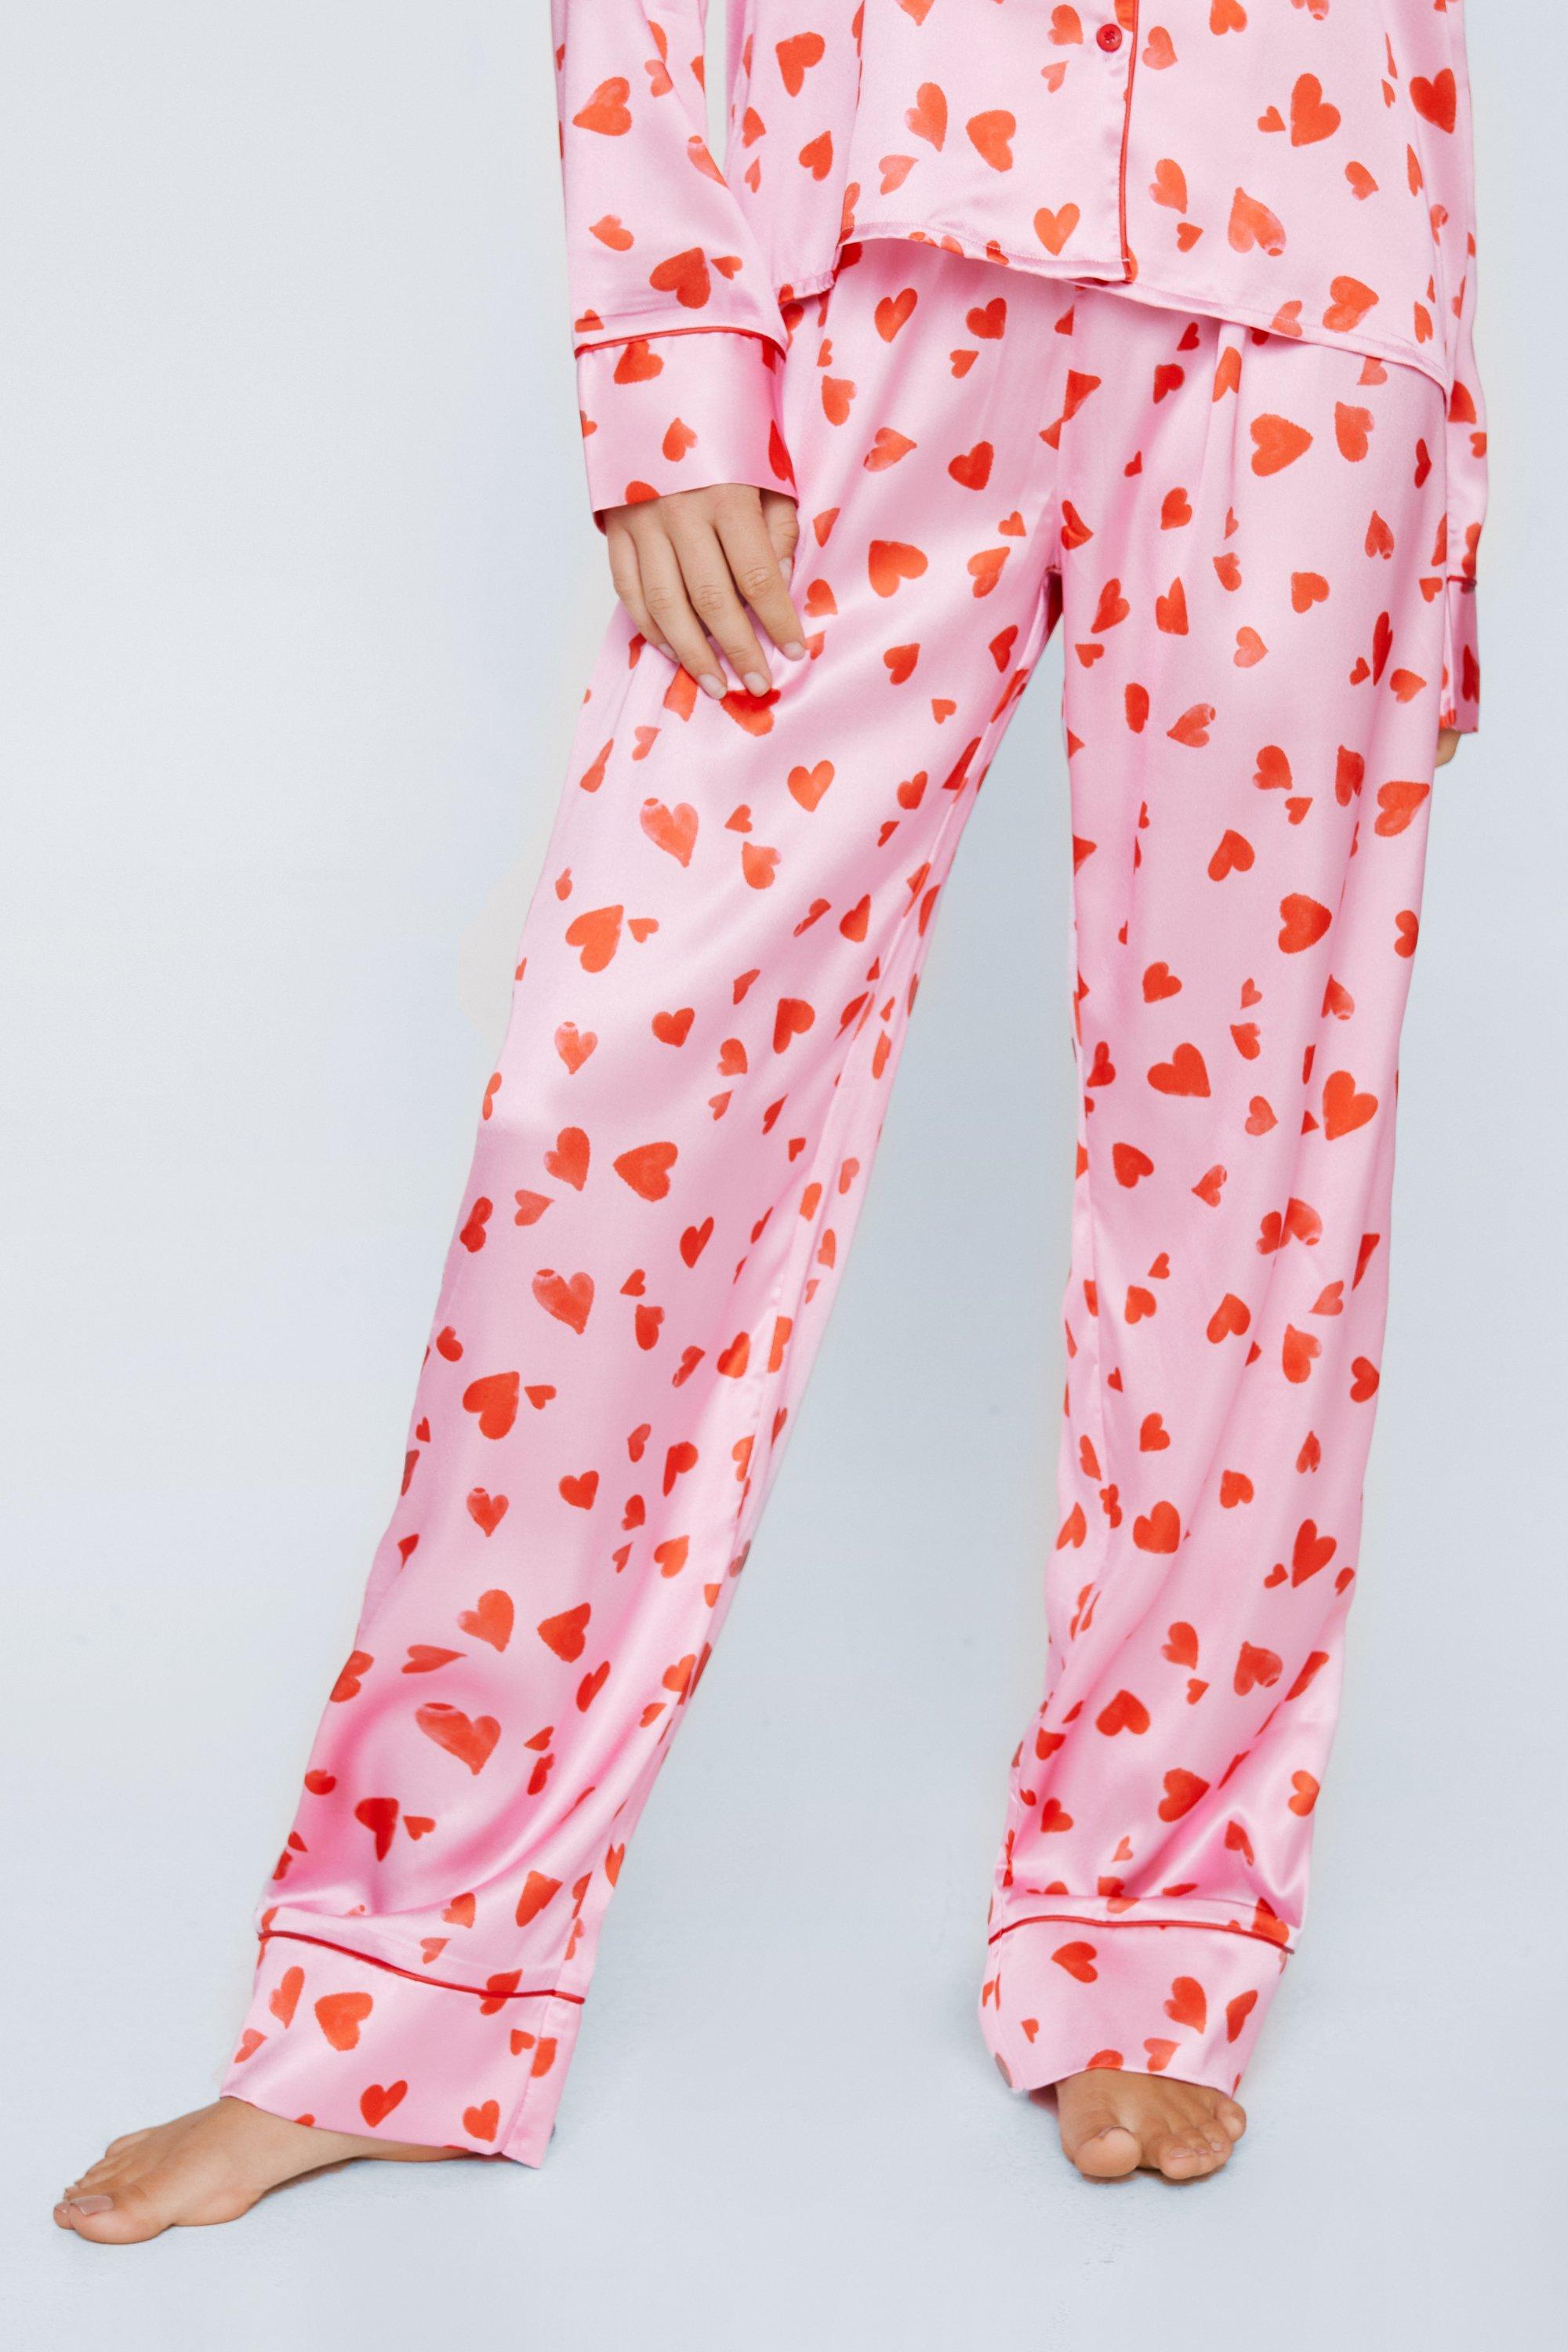 Buy Lazy One Pajamas for Women, Cute Pajama Pants and Top Set